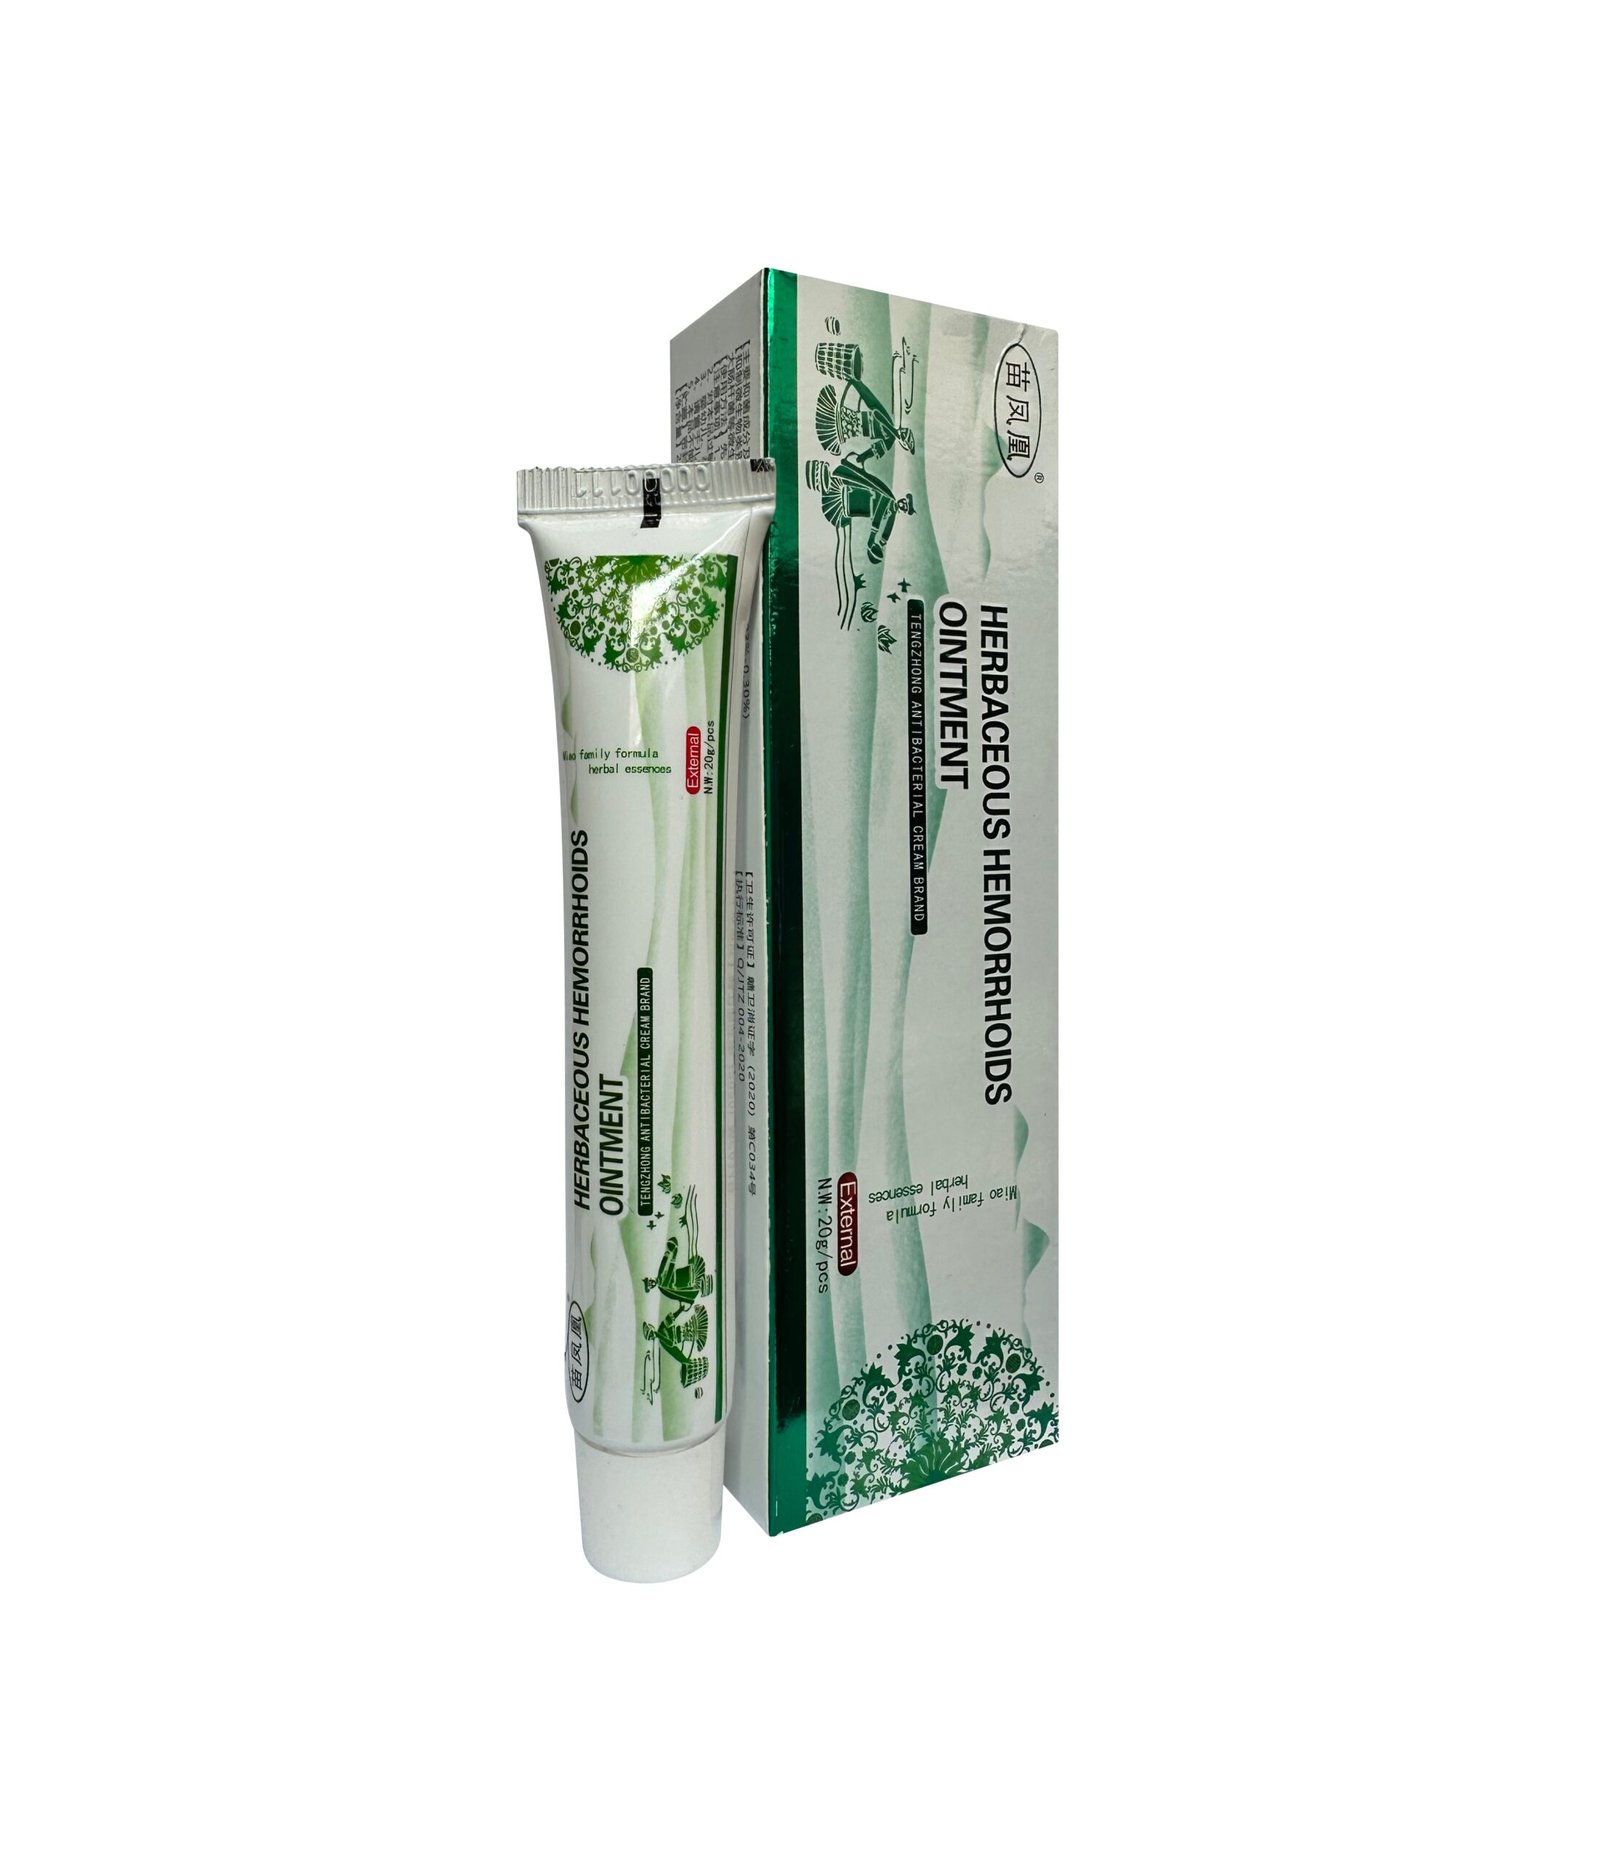 Herbaceous Hemorrhoids Ointment